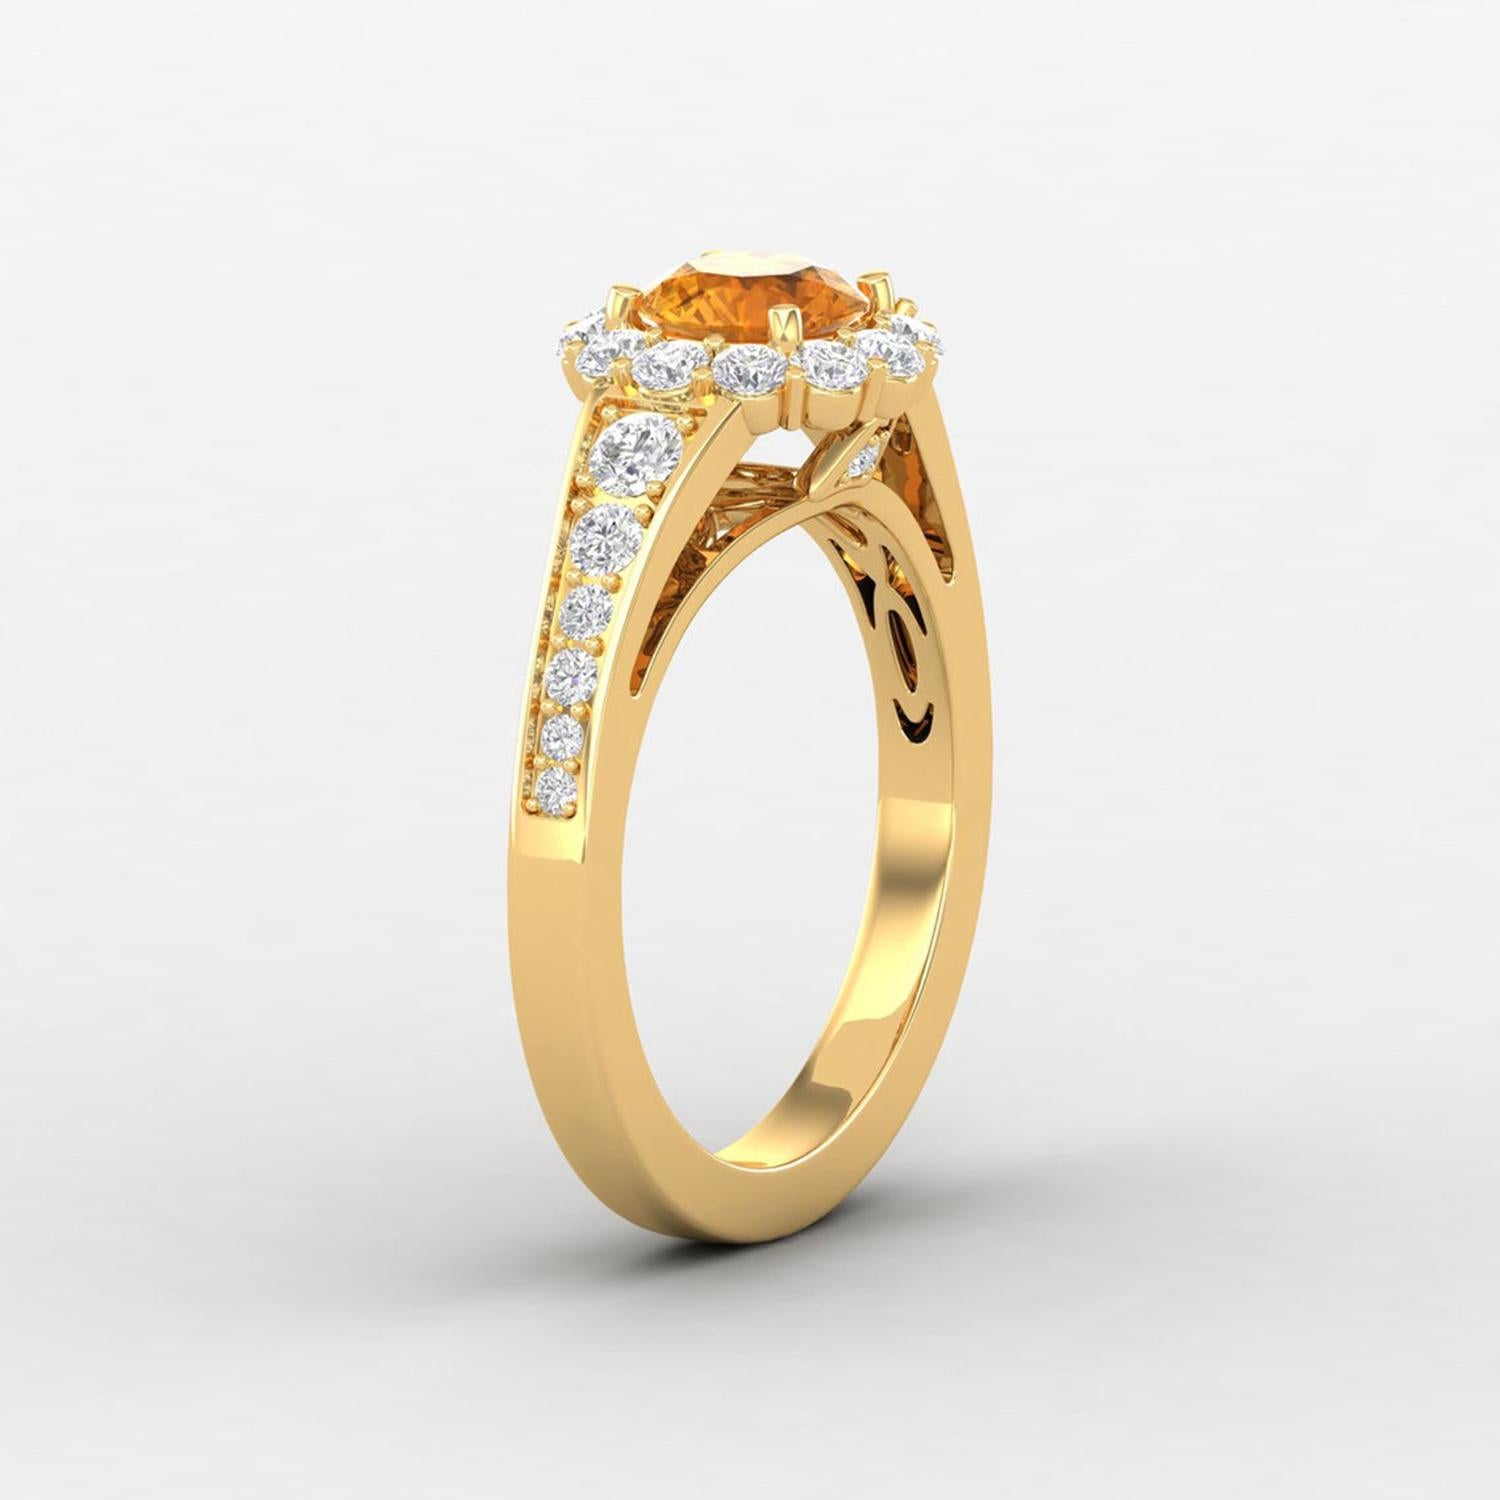 Round Cut 14 Karat Gold Citrine Ring / Round Diamond Ring / Solitaire Ring For Sale